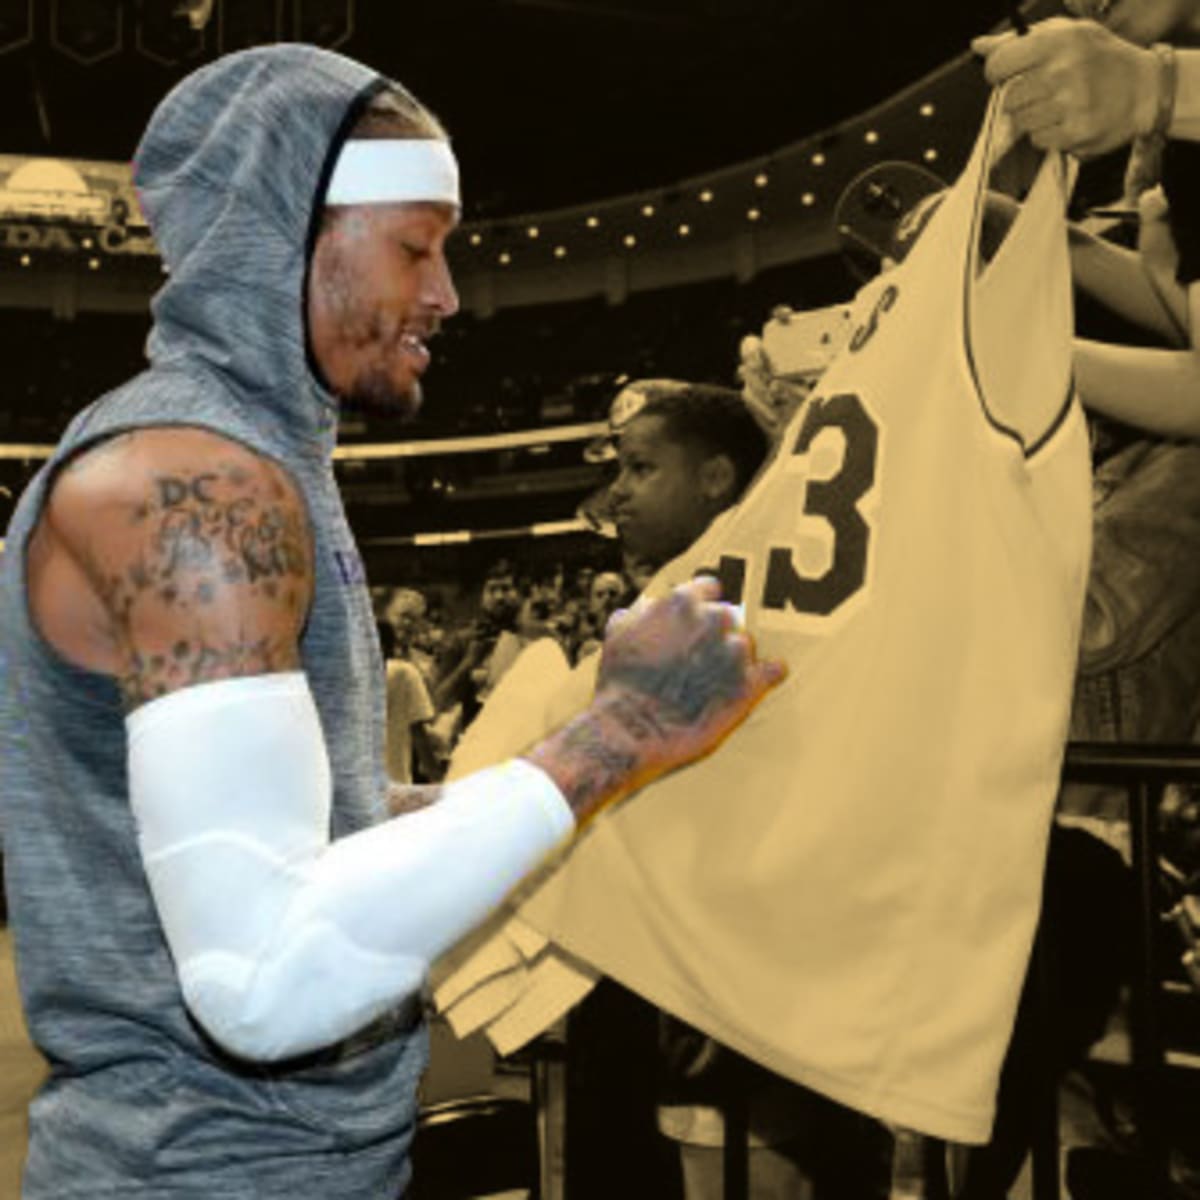 Michael Beasley Stats, News, Height, Age